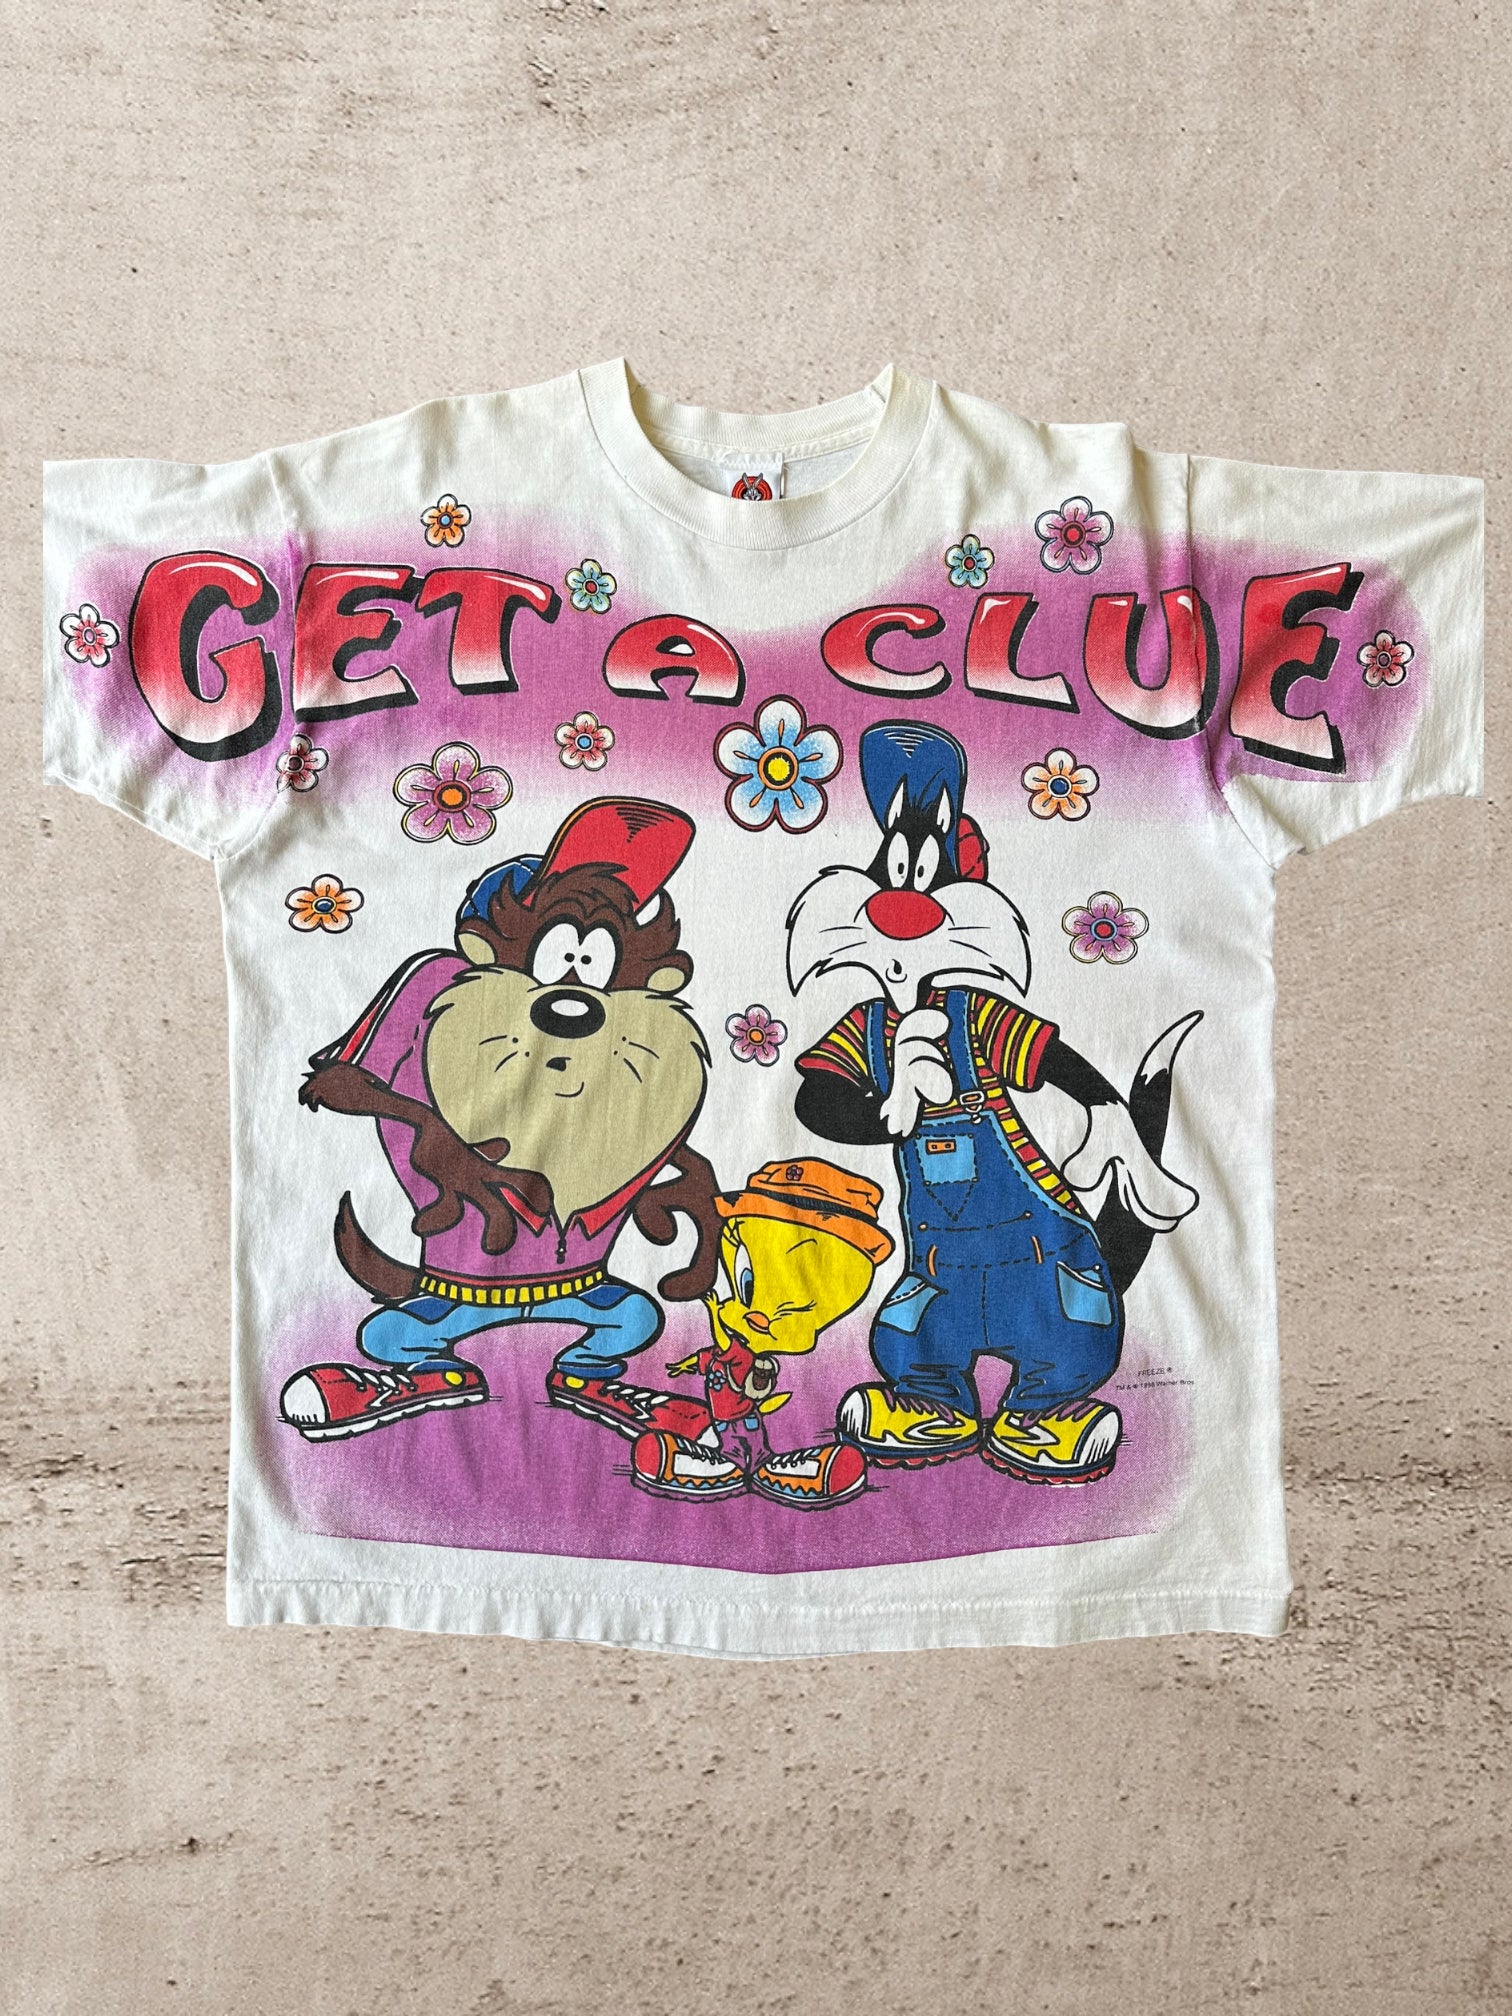 1996 Looney Tunes Get a Clue Shirt - Large